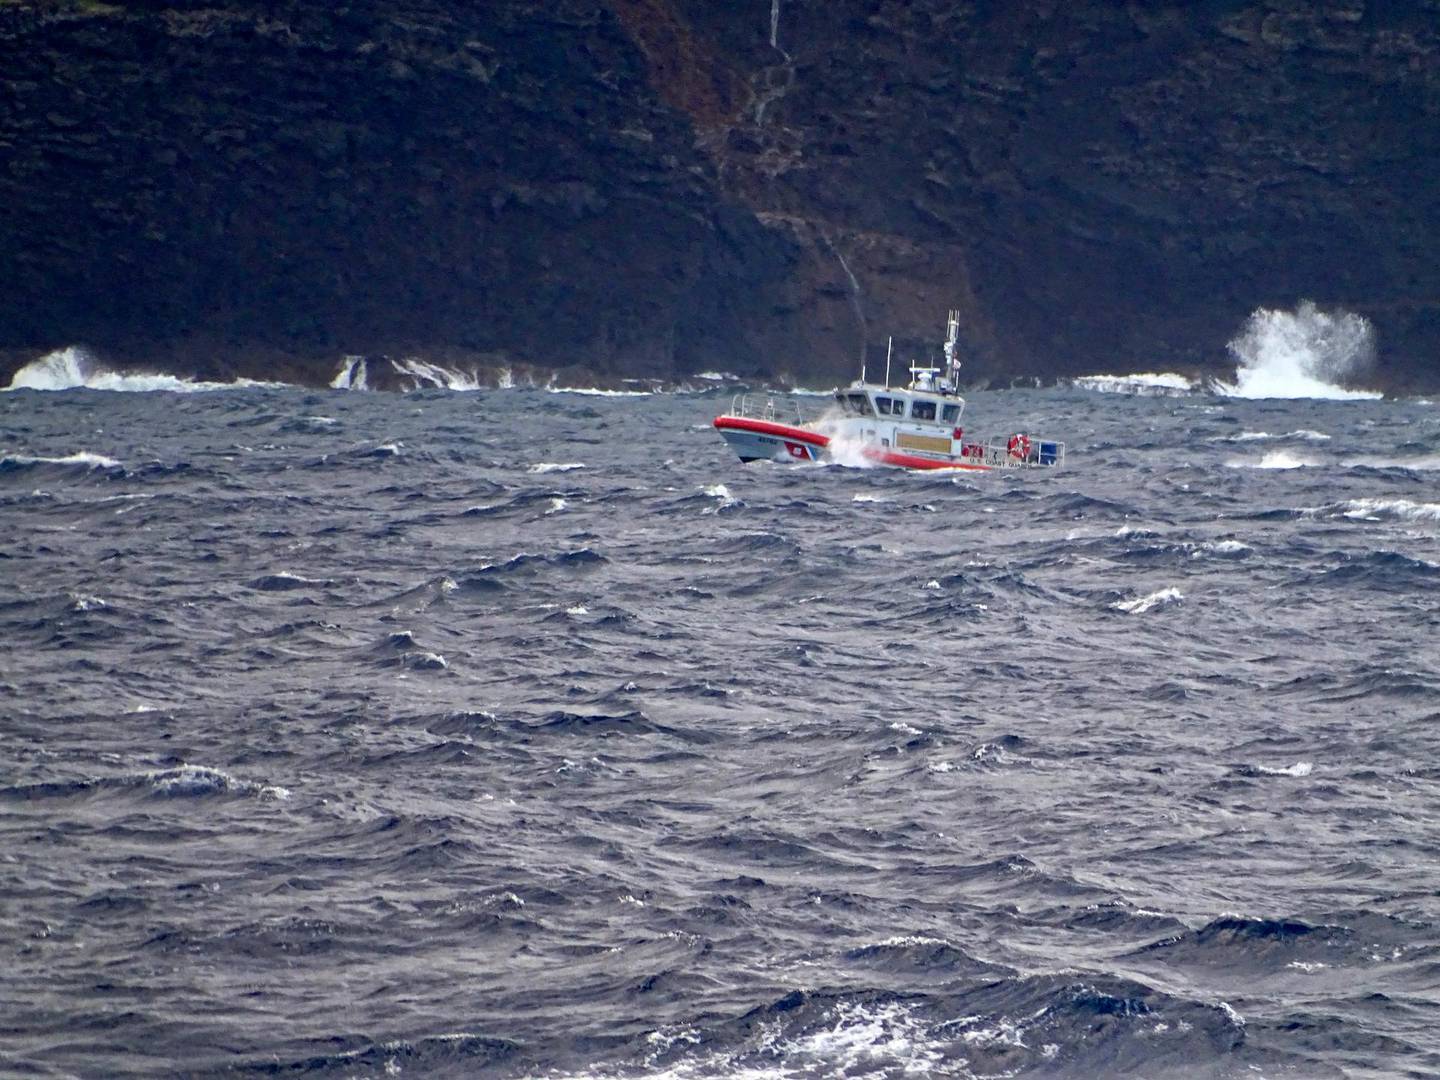 In this photo released by the U.S. Coast Guard, a coast guard vessel searches along the Na Pali Coast on the Hawaiian island of Kauai on Friday, Dec. 27, 2019, the day after a tour helicopter disappeared with seven people aboard. Authorities say wreckage of the helicopter has been found in a mountainous area on the island. (Lt. j.g. Daniel Winter/U.S. Coast Guard via AP)